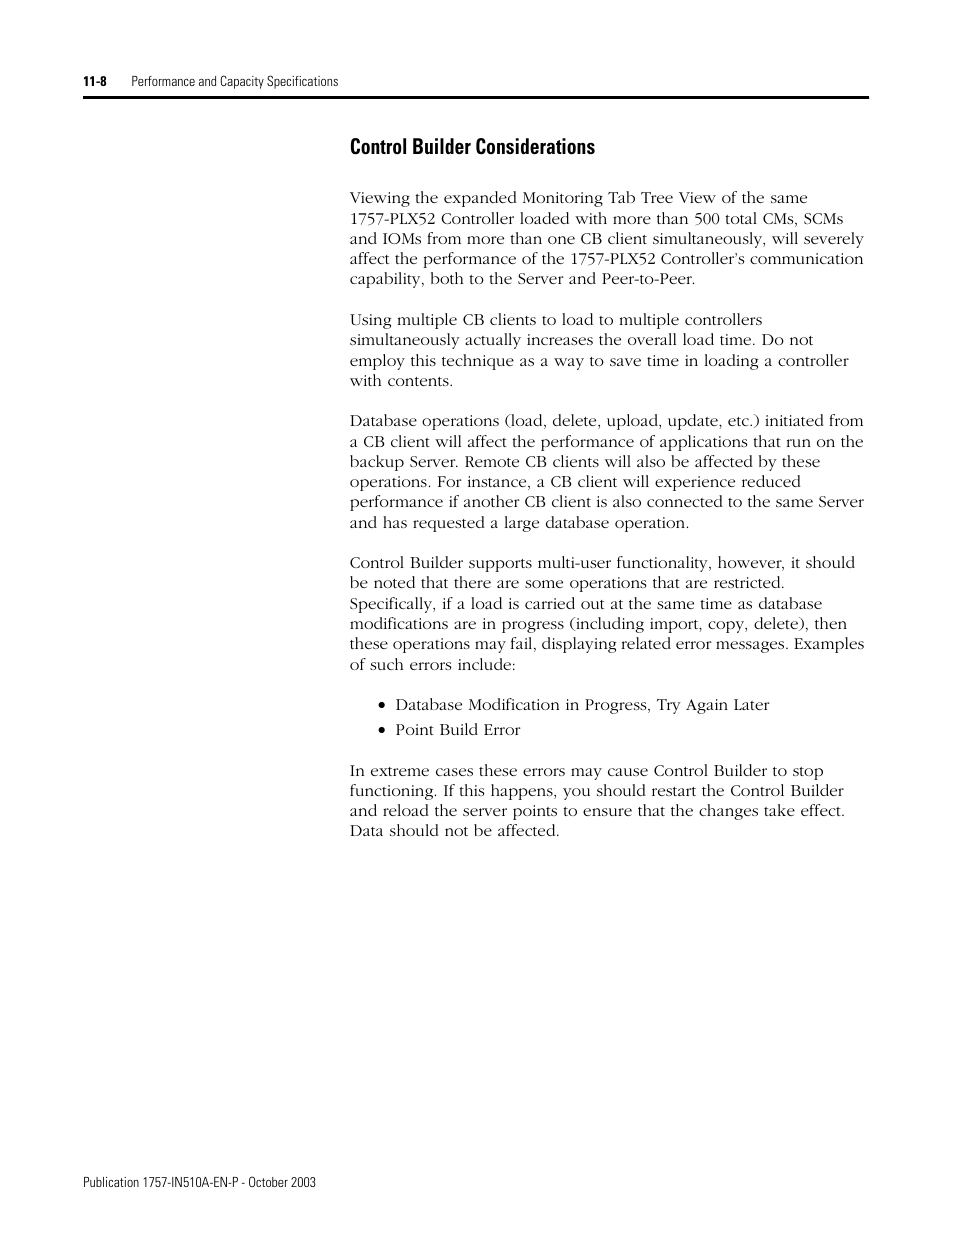 Control builder considerations, Control builder considerations -8 | Rockwell Automation 1757-SWKIT5100 ProcessLogix R510.0 Installation and Upgrade Guide User Manual | Page 248 / 271